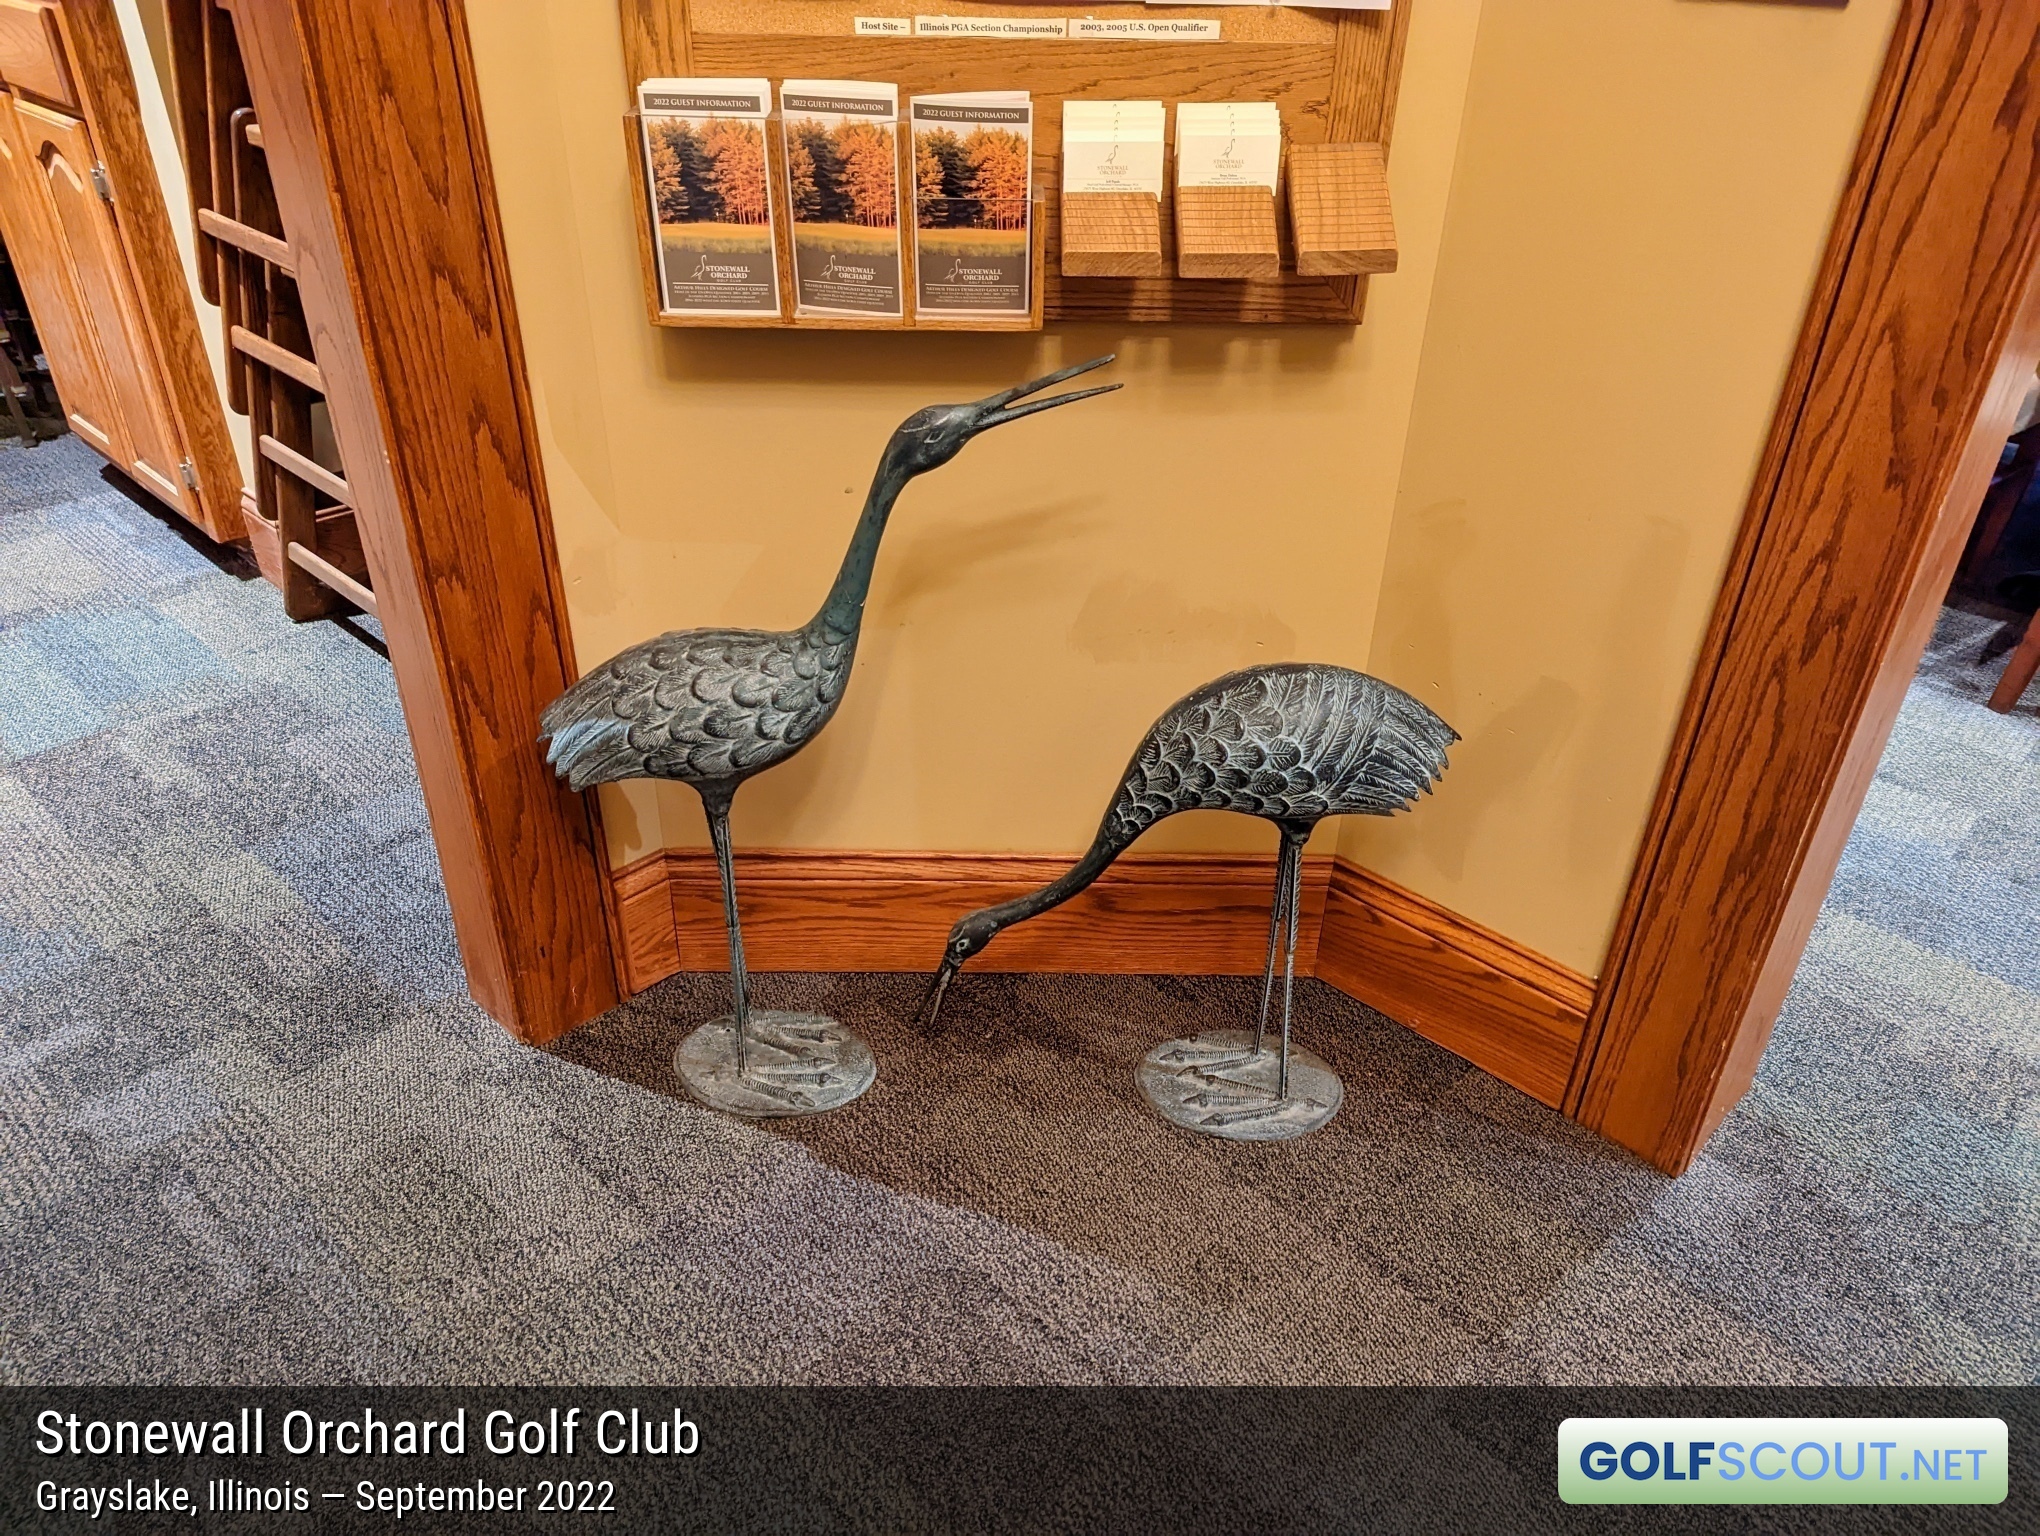 Miscellaneous photo of Stonewall Orchard Golf Club in Grayslake, Illinois. After I saw Sandhill Cranes out on the course, I noticed these guys in the clubhouse. Also the logo on the scorecard is either a Sandhill Crane or a Great Egret.